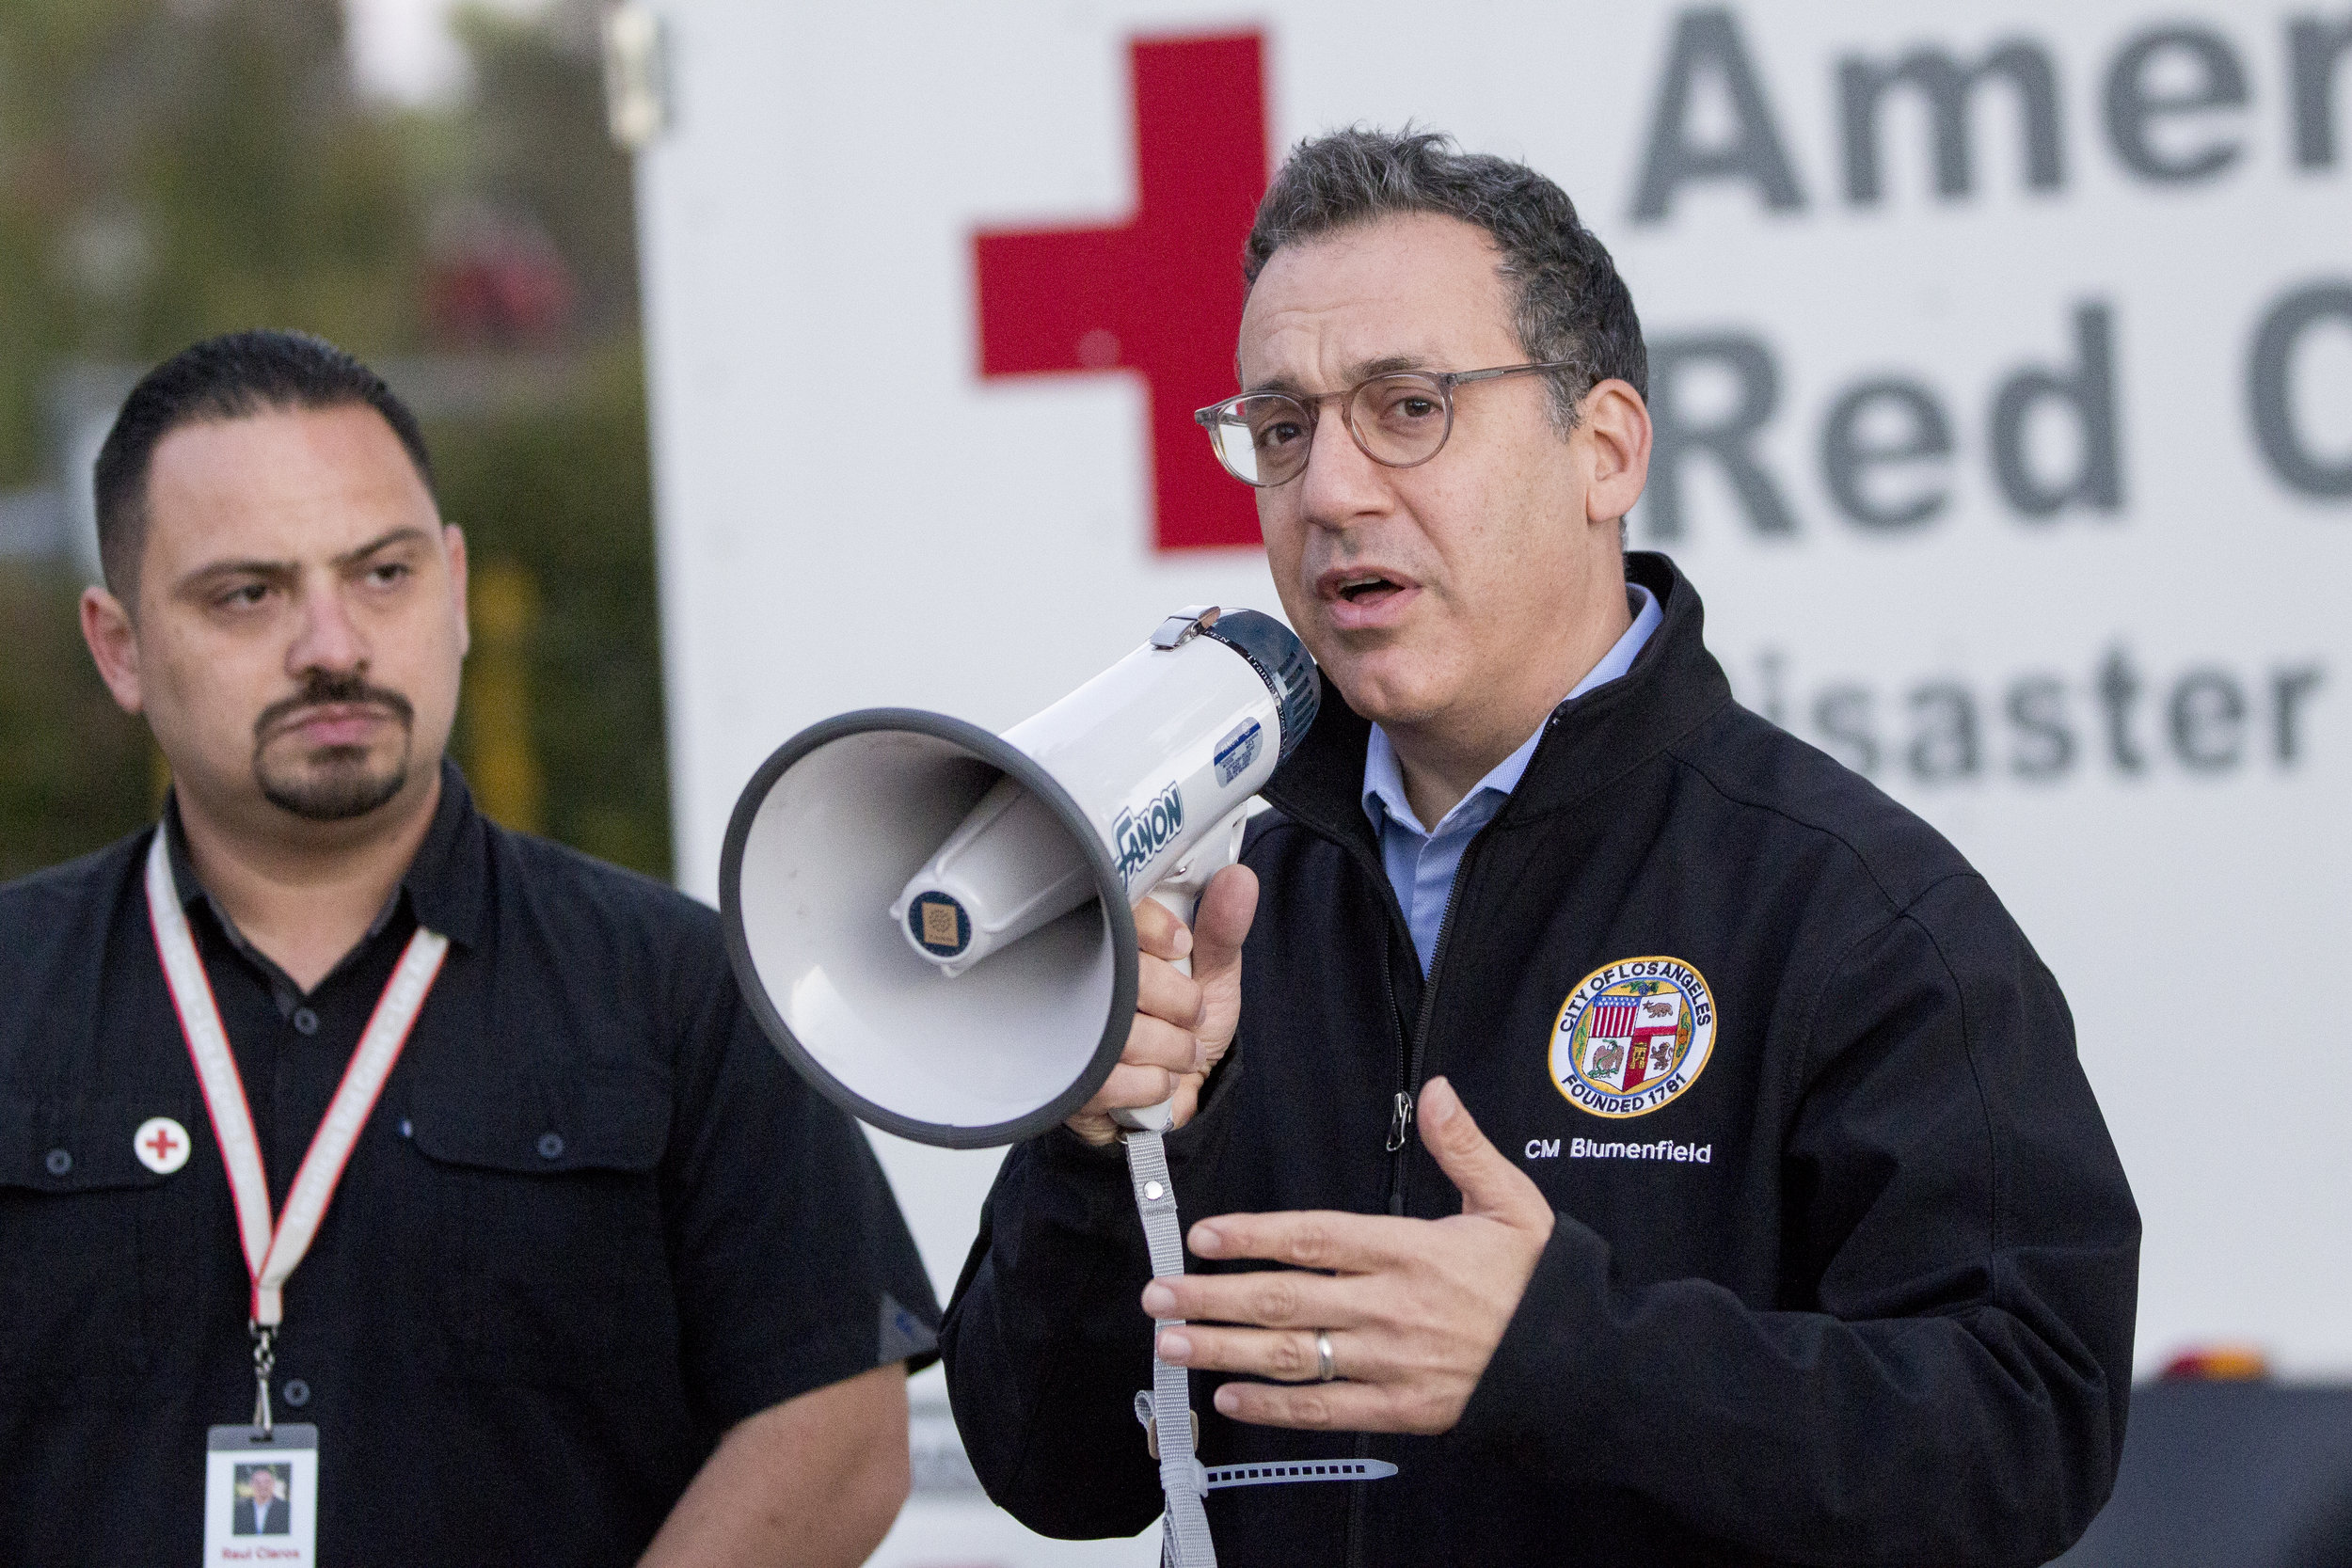  Councilmember Bob Blumenfield speaks to evacuees at the Woolsey fire evacuation center set up at Los Angeles Pierce College on November 9, 2018 in Woodland Hills, Calif. (Jose Lopez) 